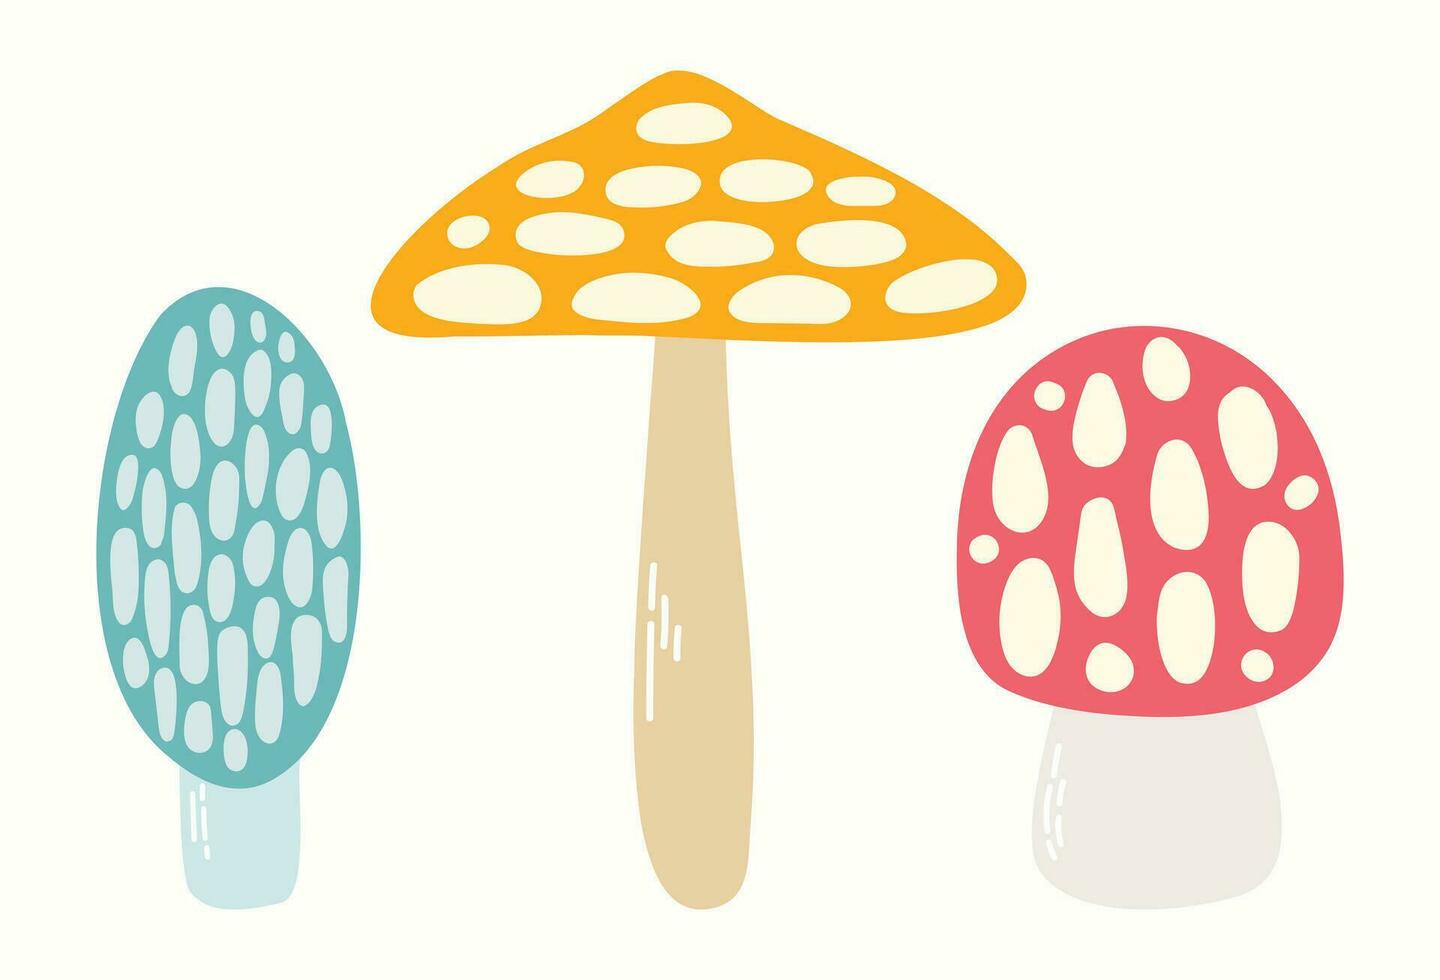 Clip art set of doodle cute mushrooms on isolated background. Hand drawn background for Autumn harvest holiday, Thanksgiving, Halloween, seasonal, textile, scrapbooking, paper crafts. vector